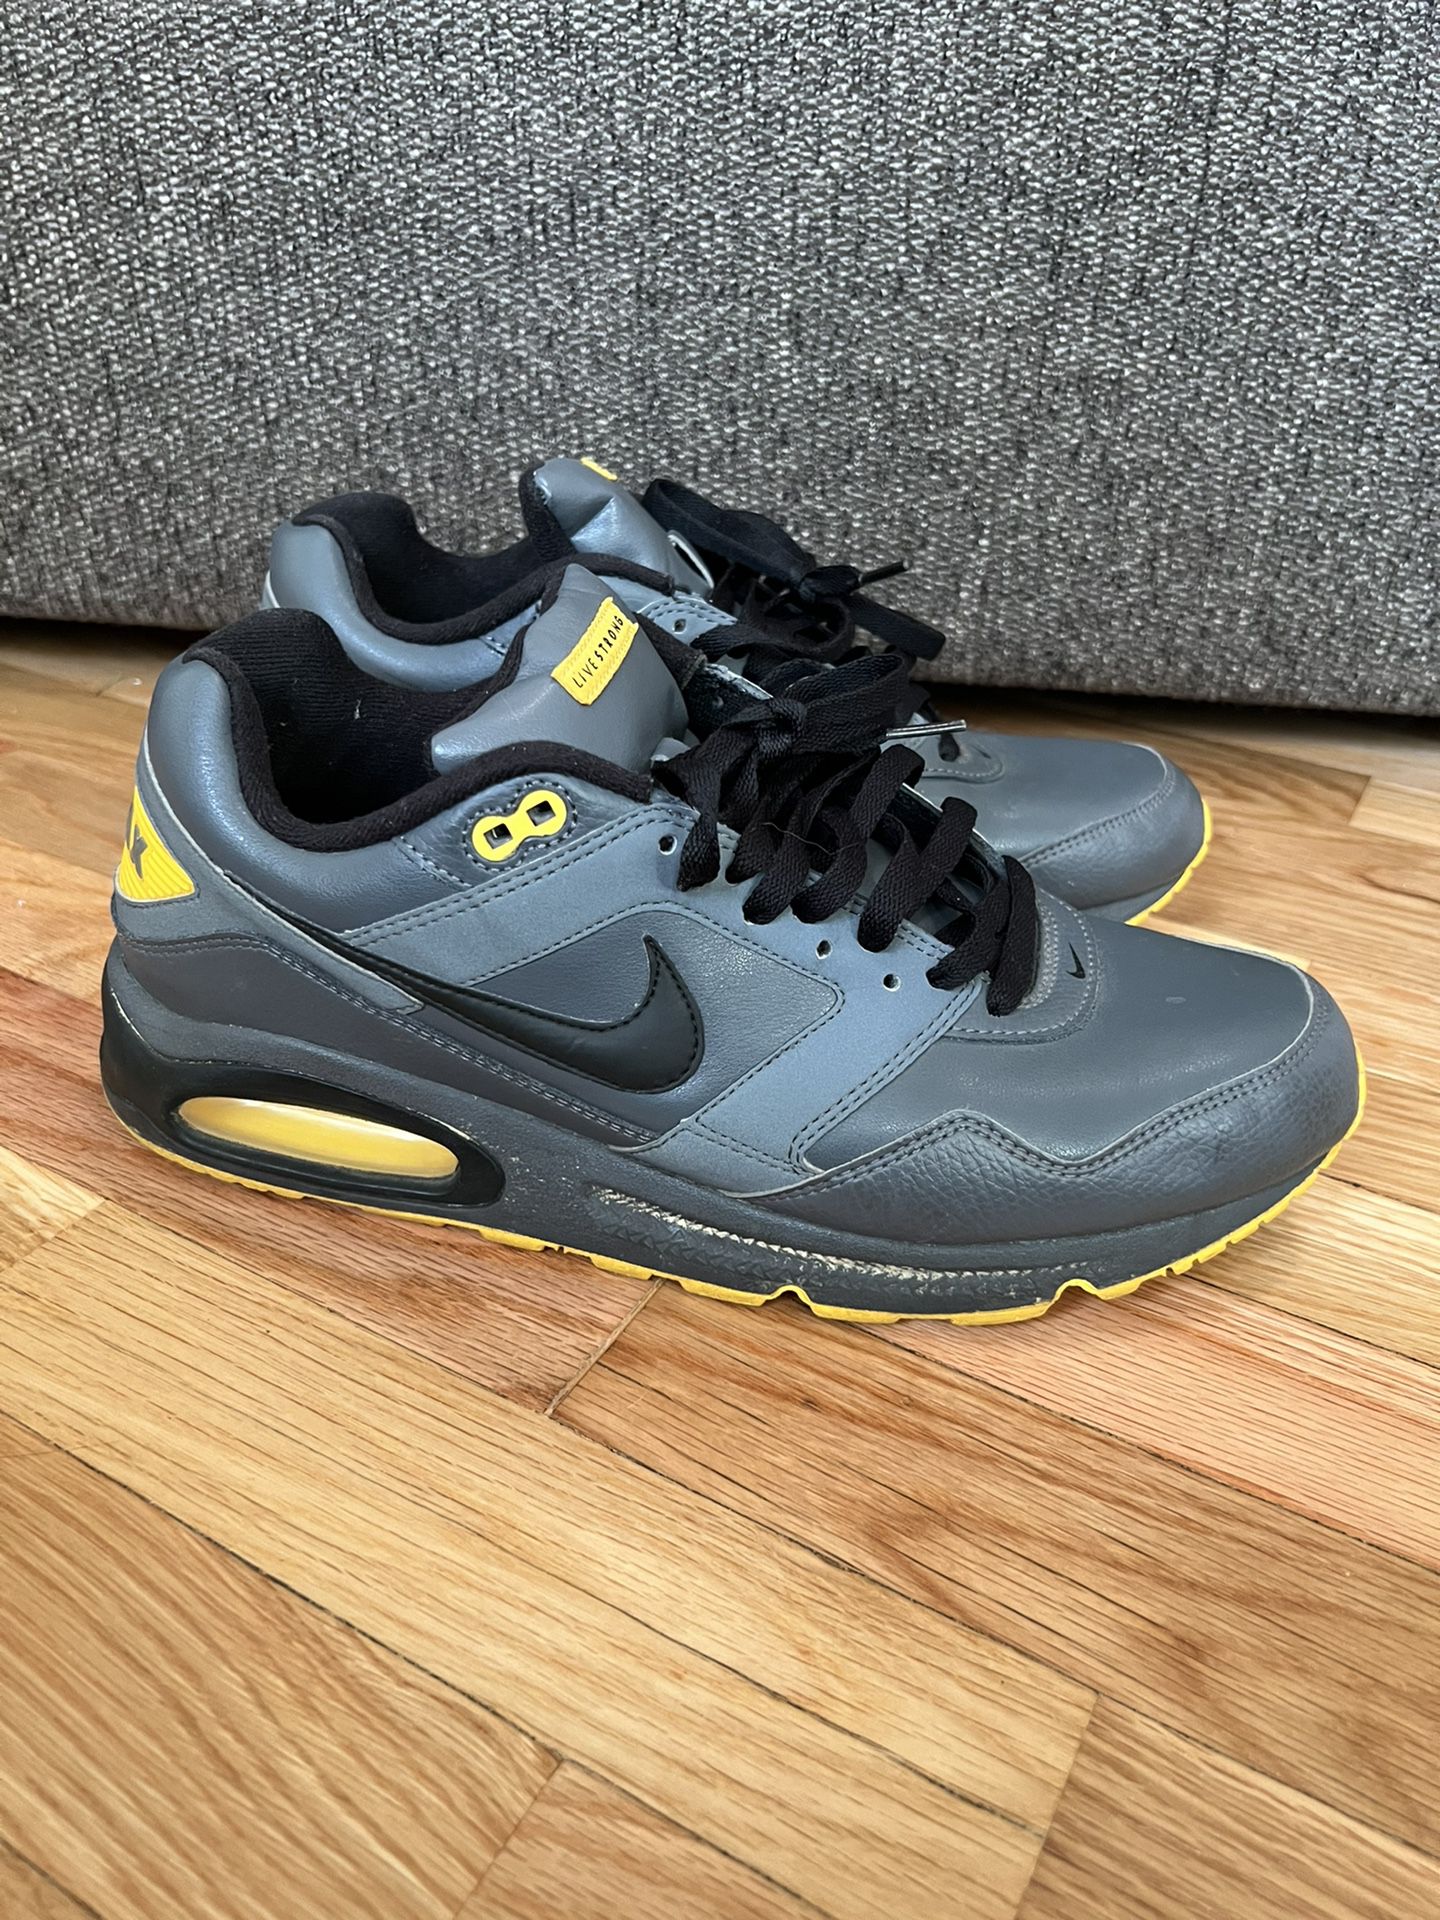 NIKE AIR MAX LIVESTRONG GREY ATHLETIC SIZE 12 MENS for Sale in Tacoma, WA - OfferUp